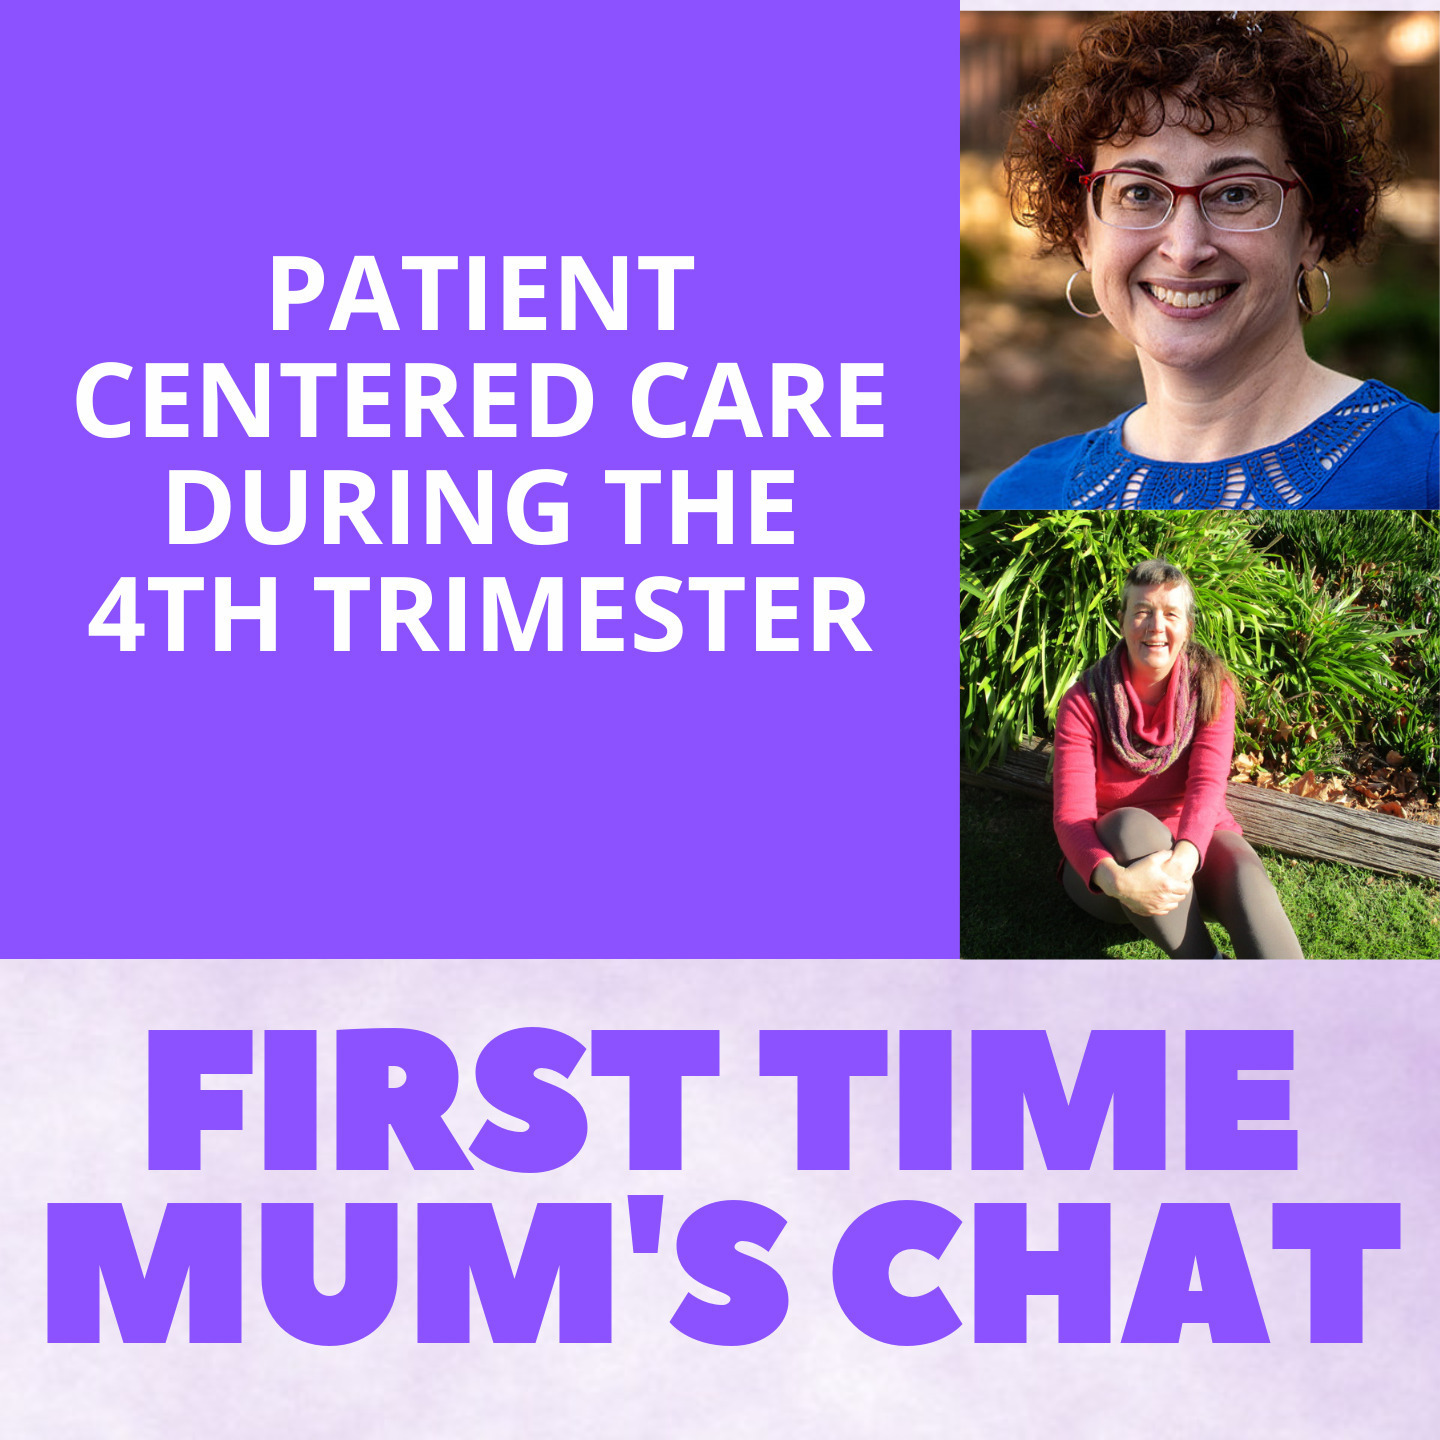 Patient Centered Care During the 4th Trimester